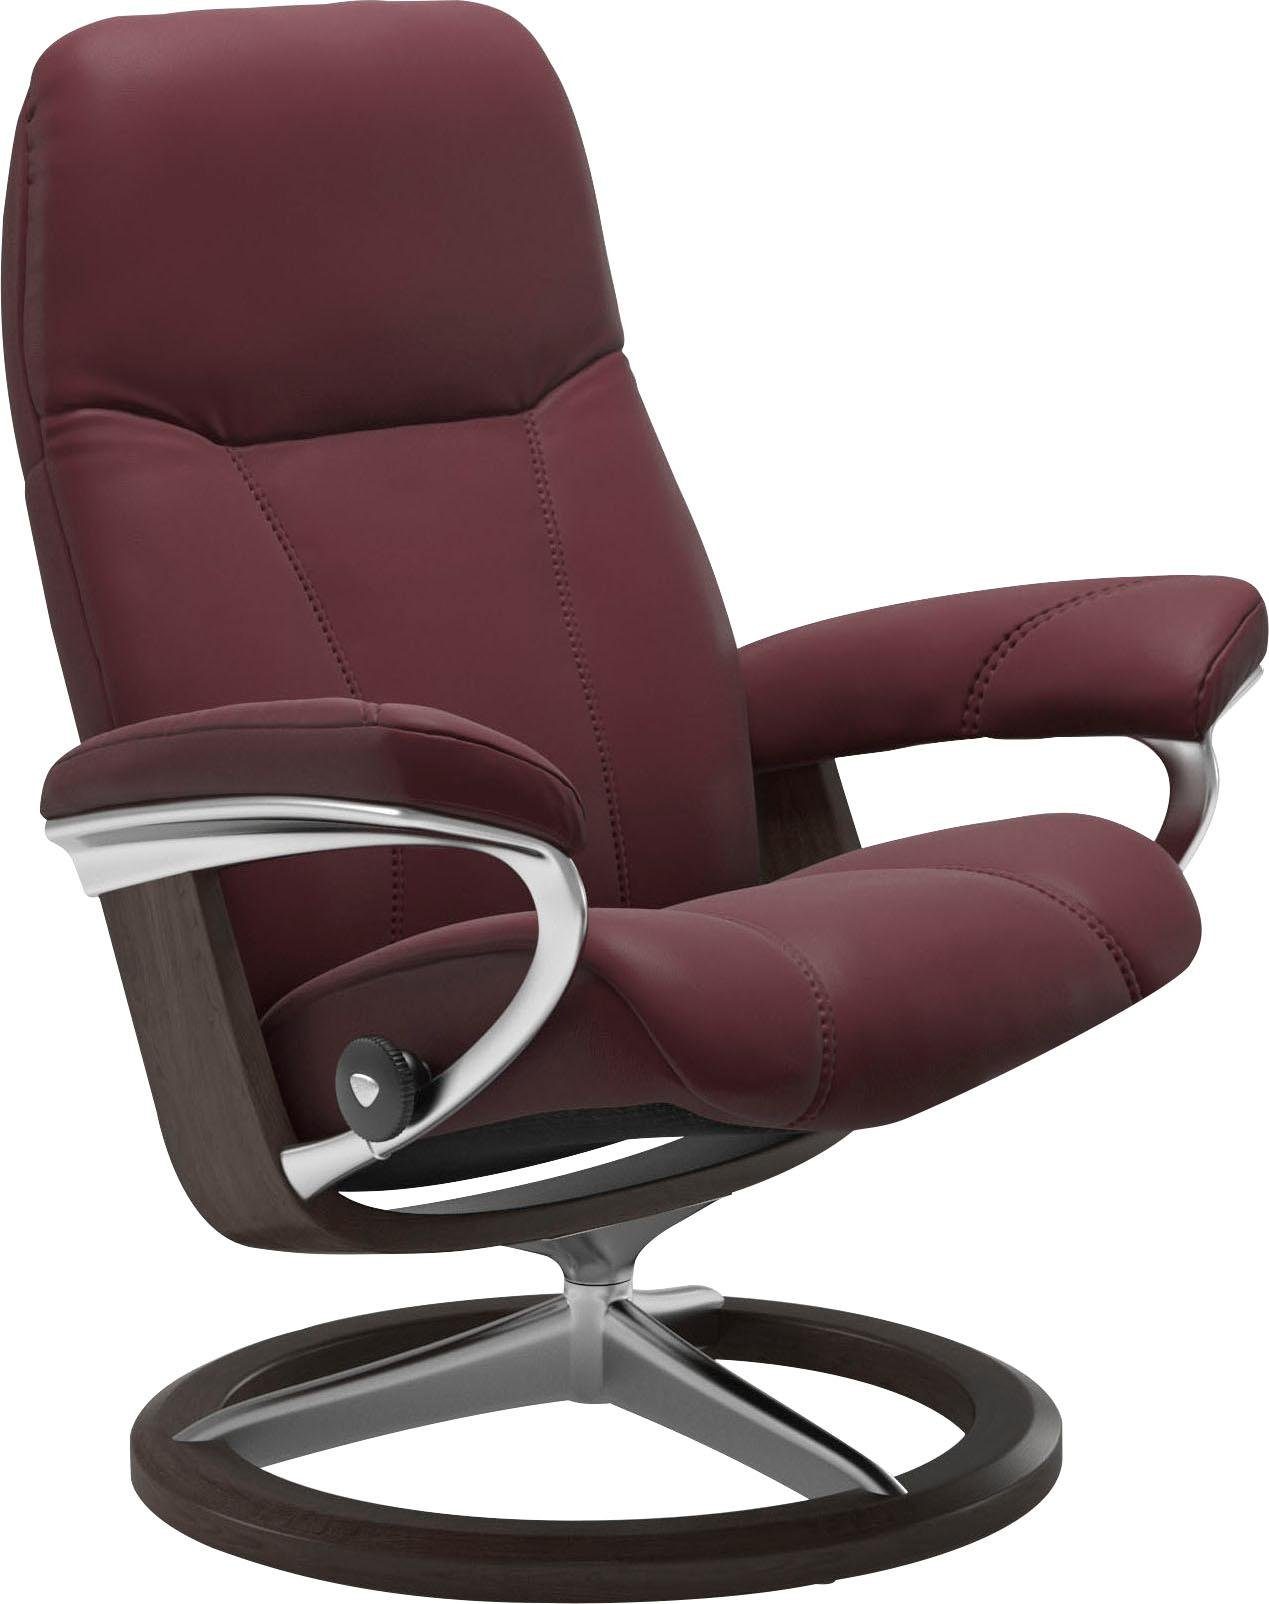 Stressless® Relaxsessel Consul, mit Base, S, Signature Größe Gestell Wenge